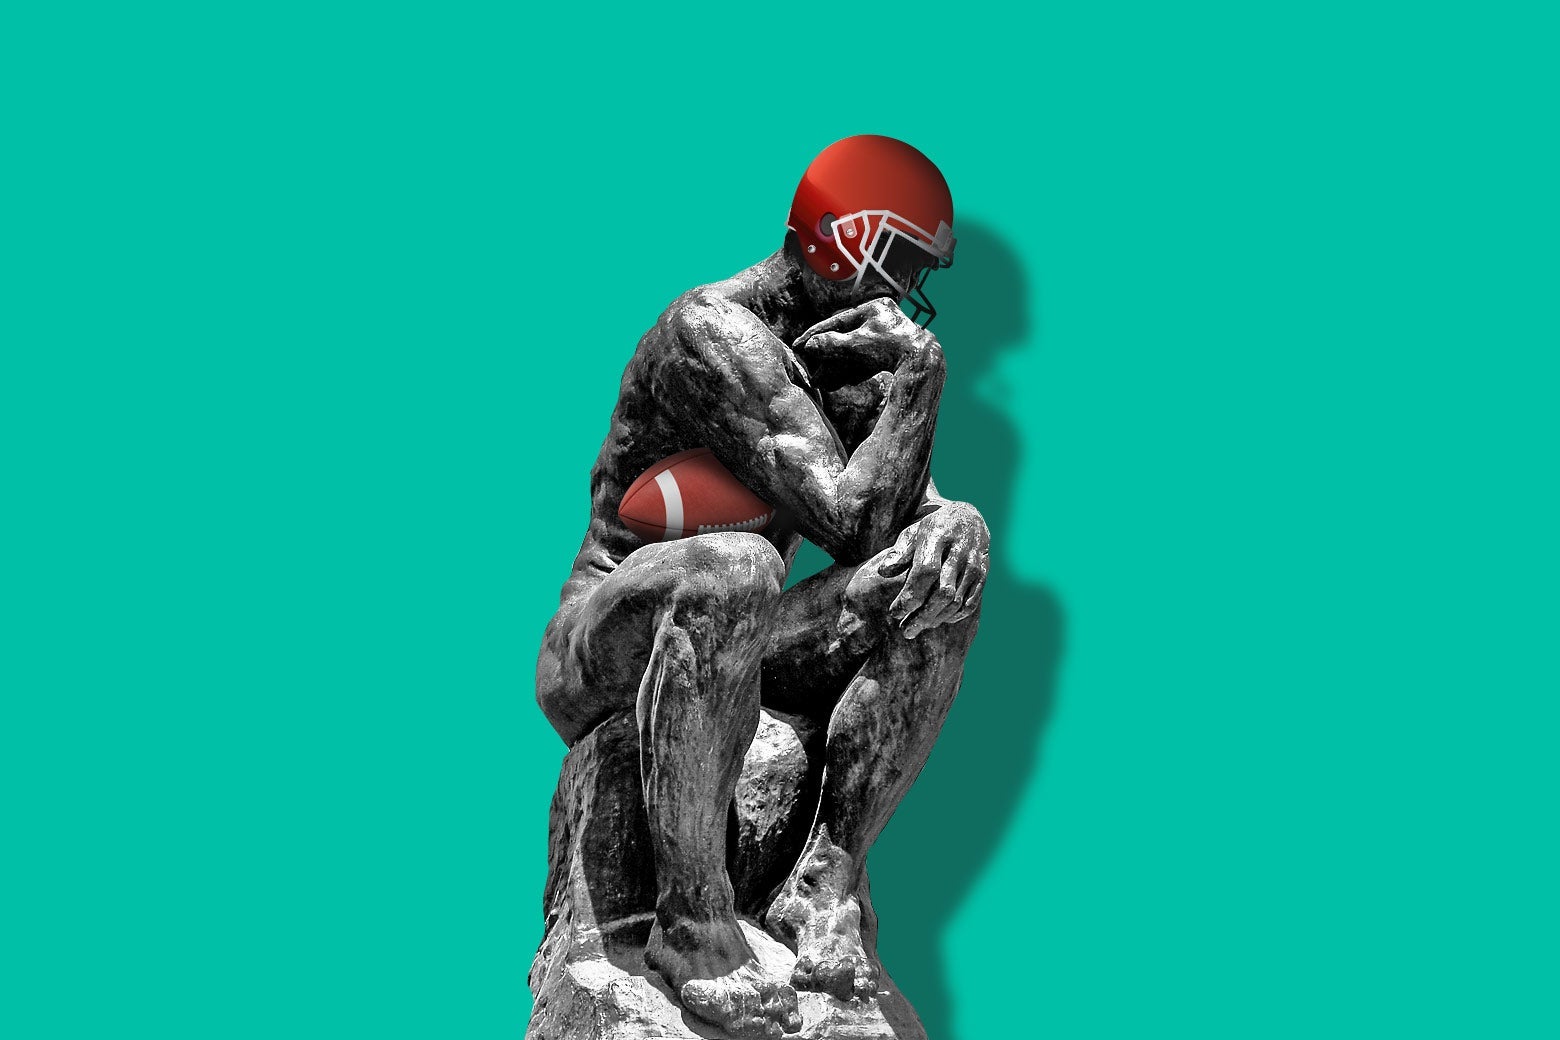 The Thinker wears a football helmet and cradles a football.